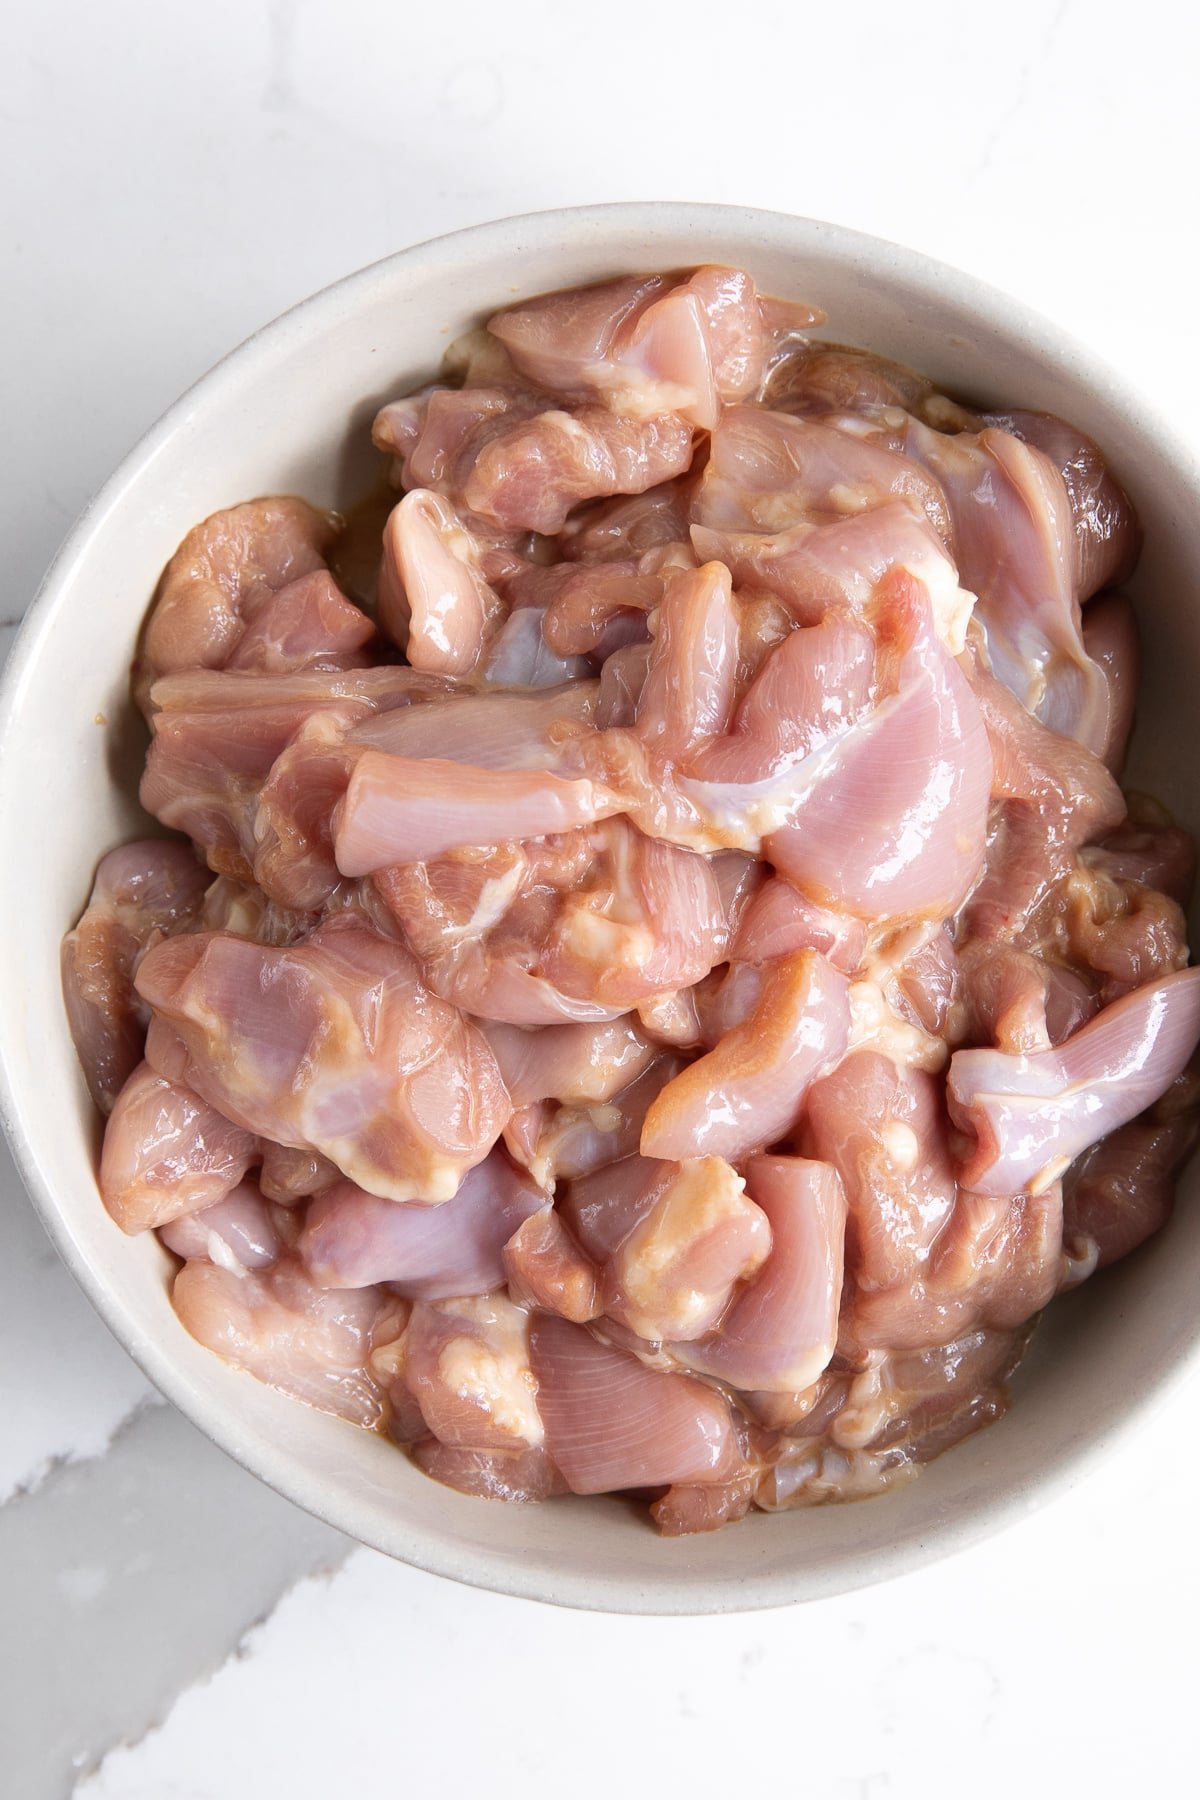 Chicken pieces marinating in a large white bowl.